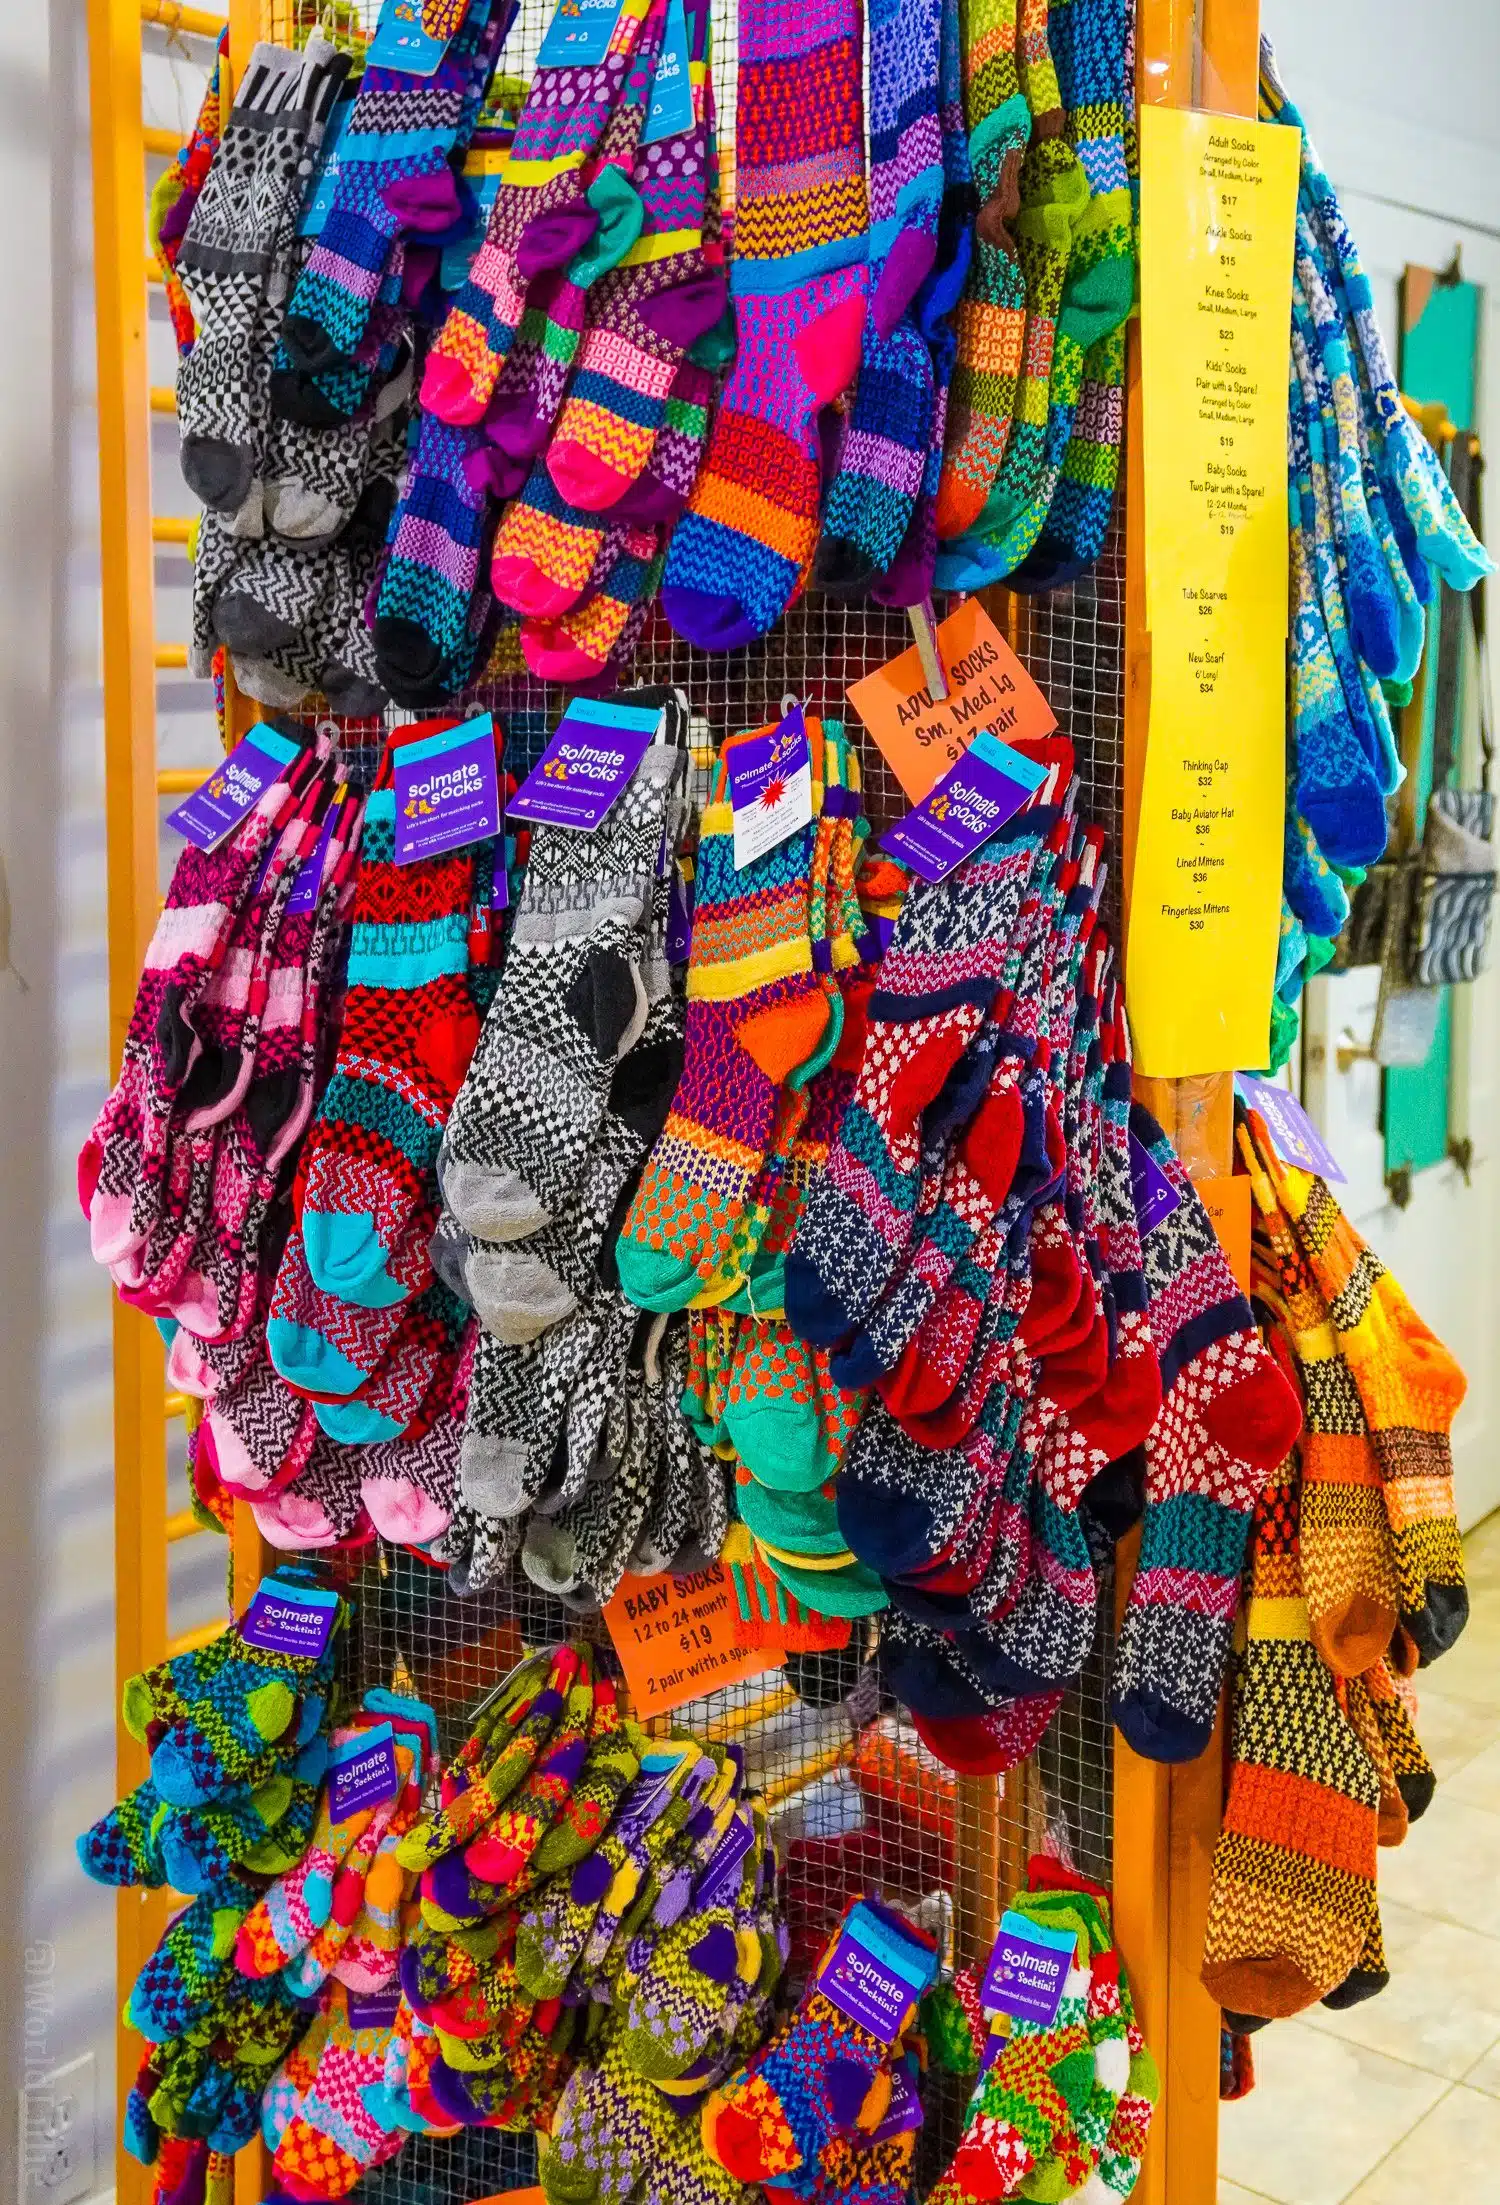 These bright socks are a Main Exhibit best-seller.